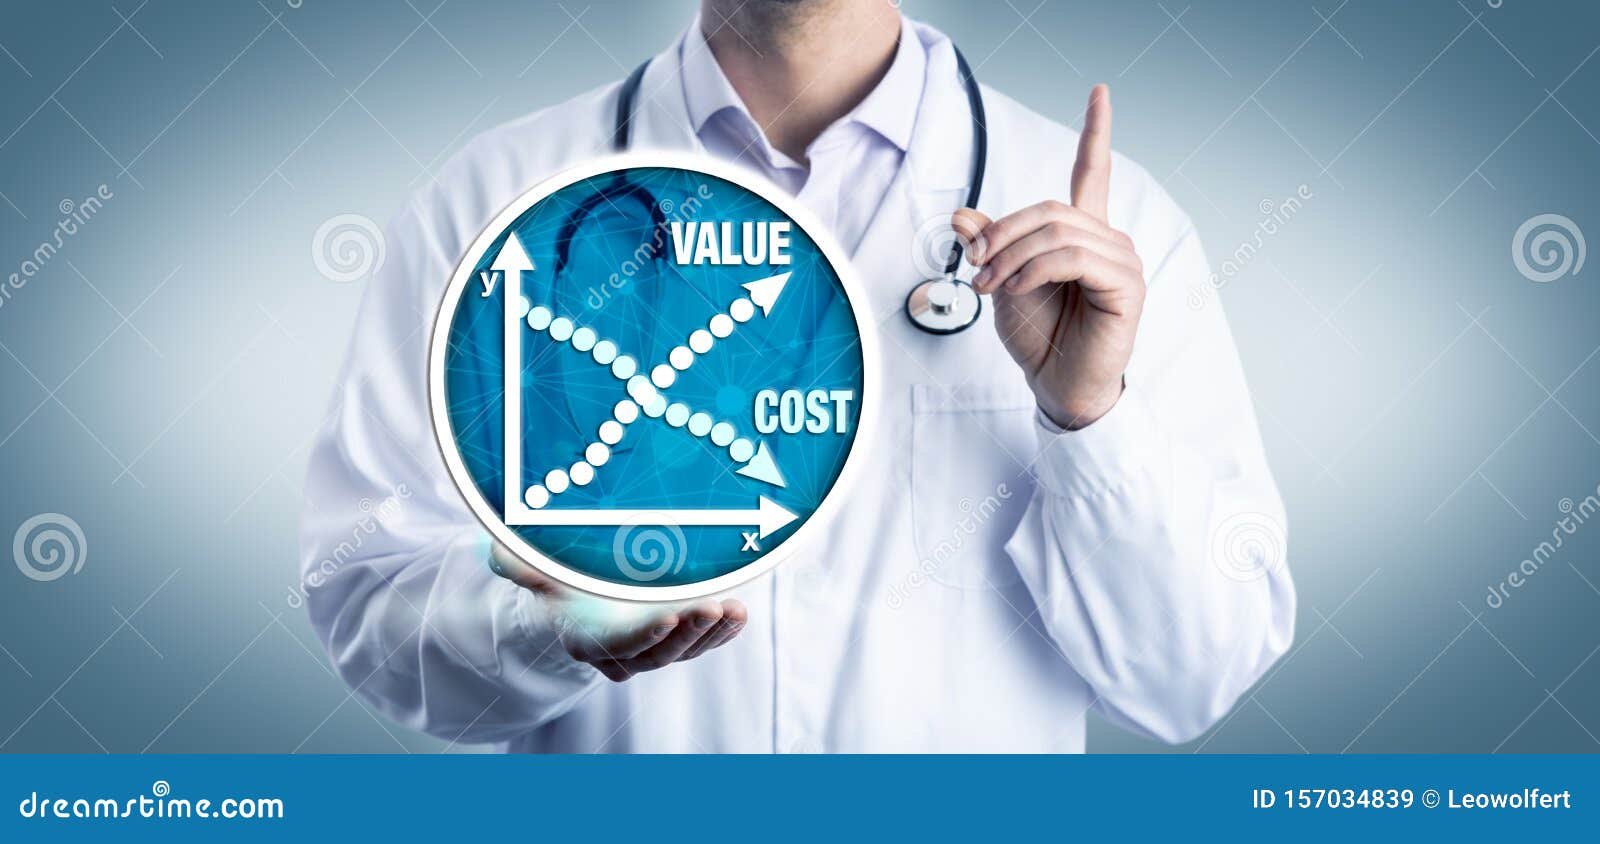 young clinician advising on cost versus value